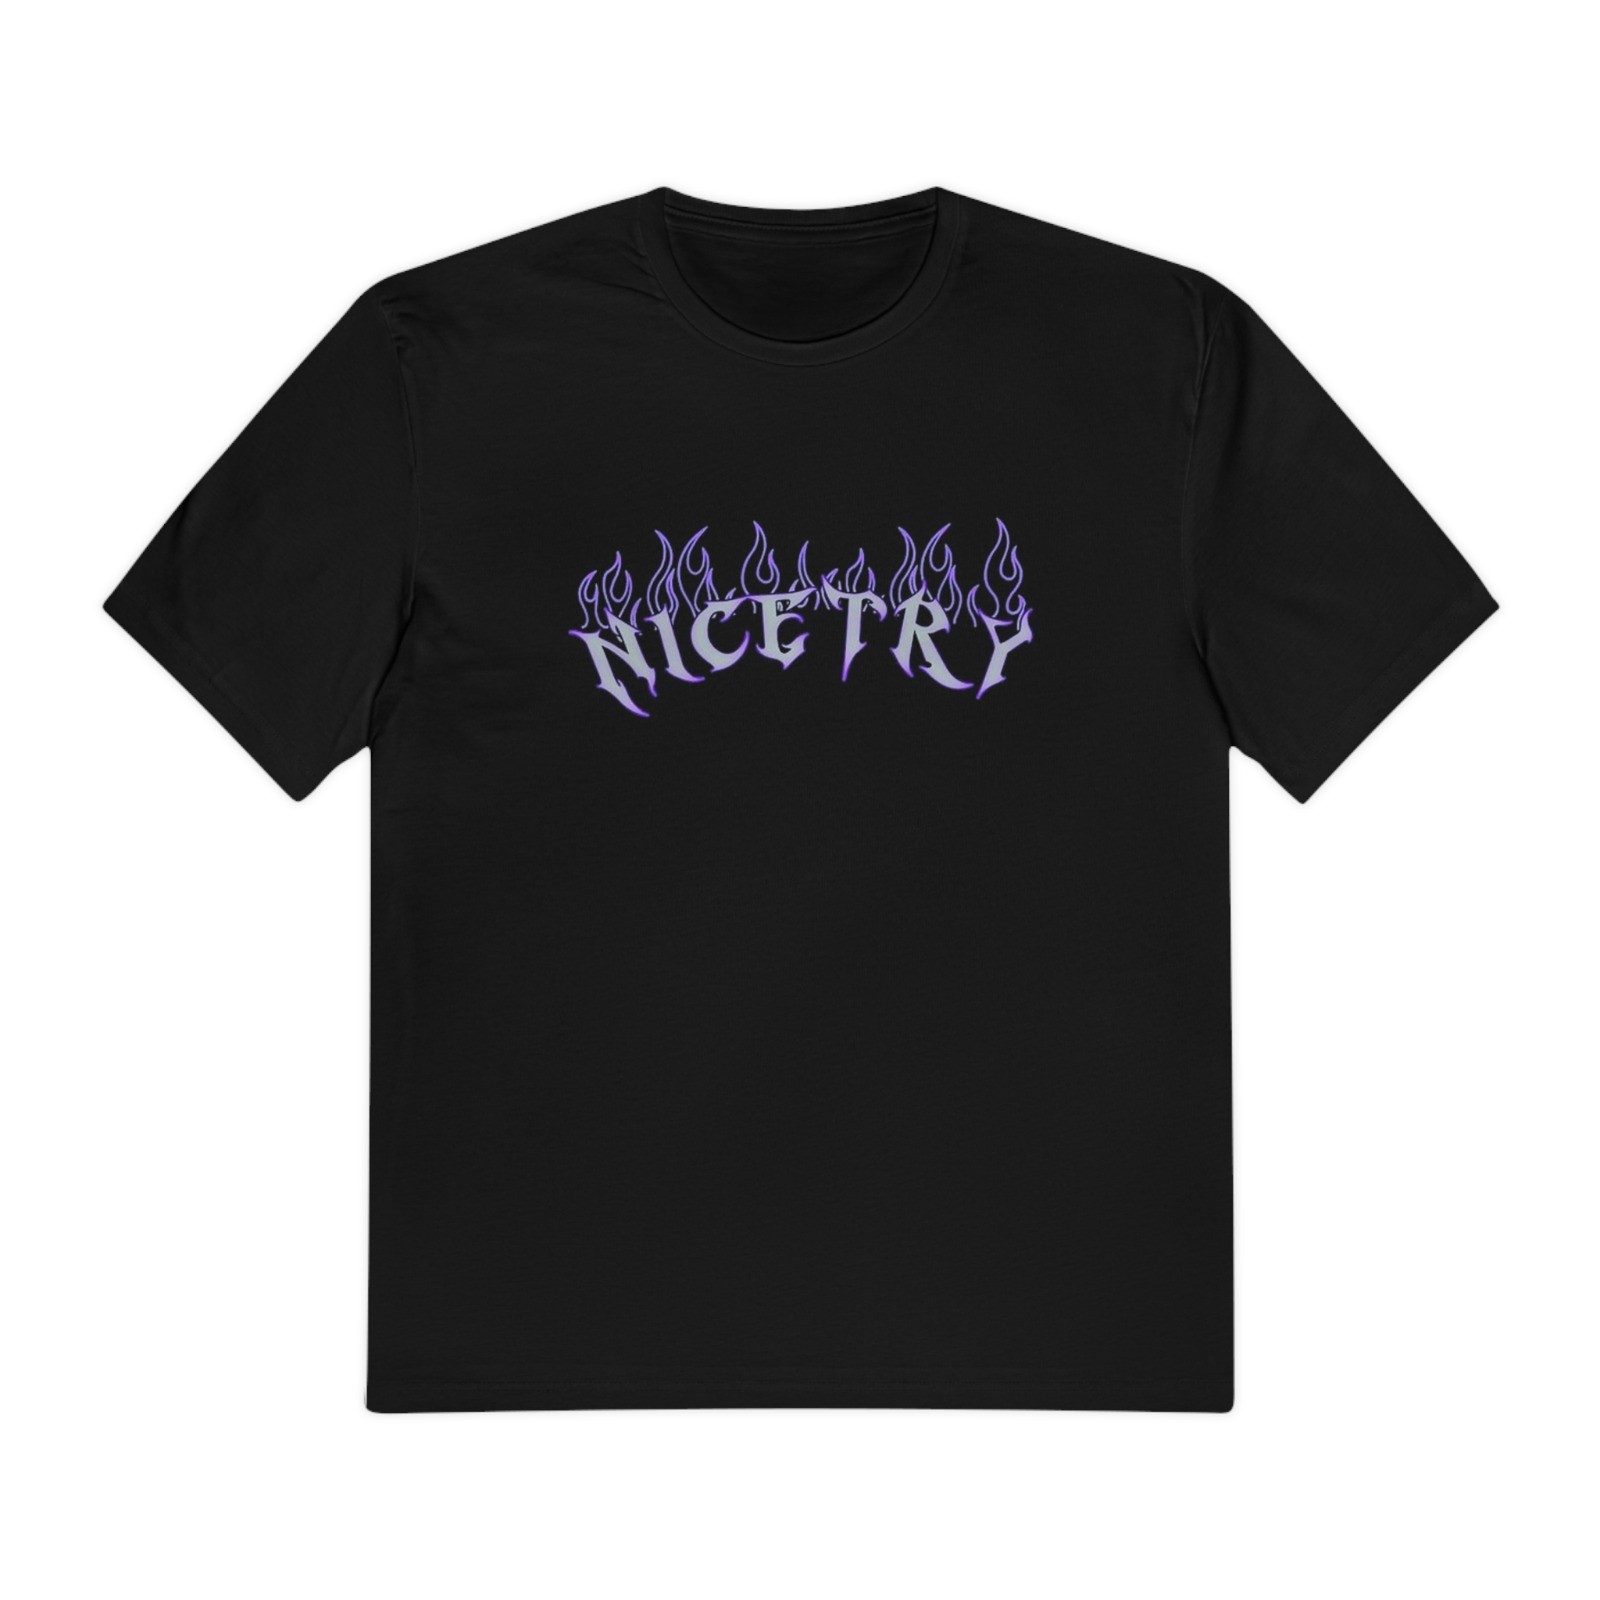 NiceTry Oversize T-shirt